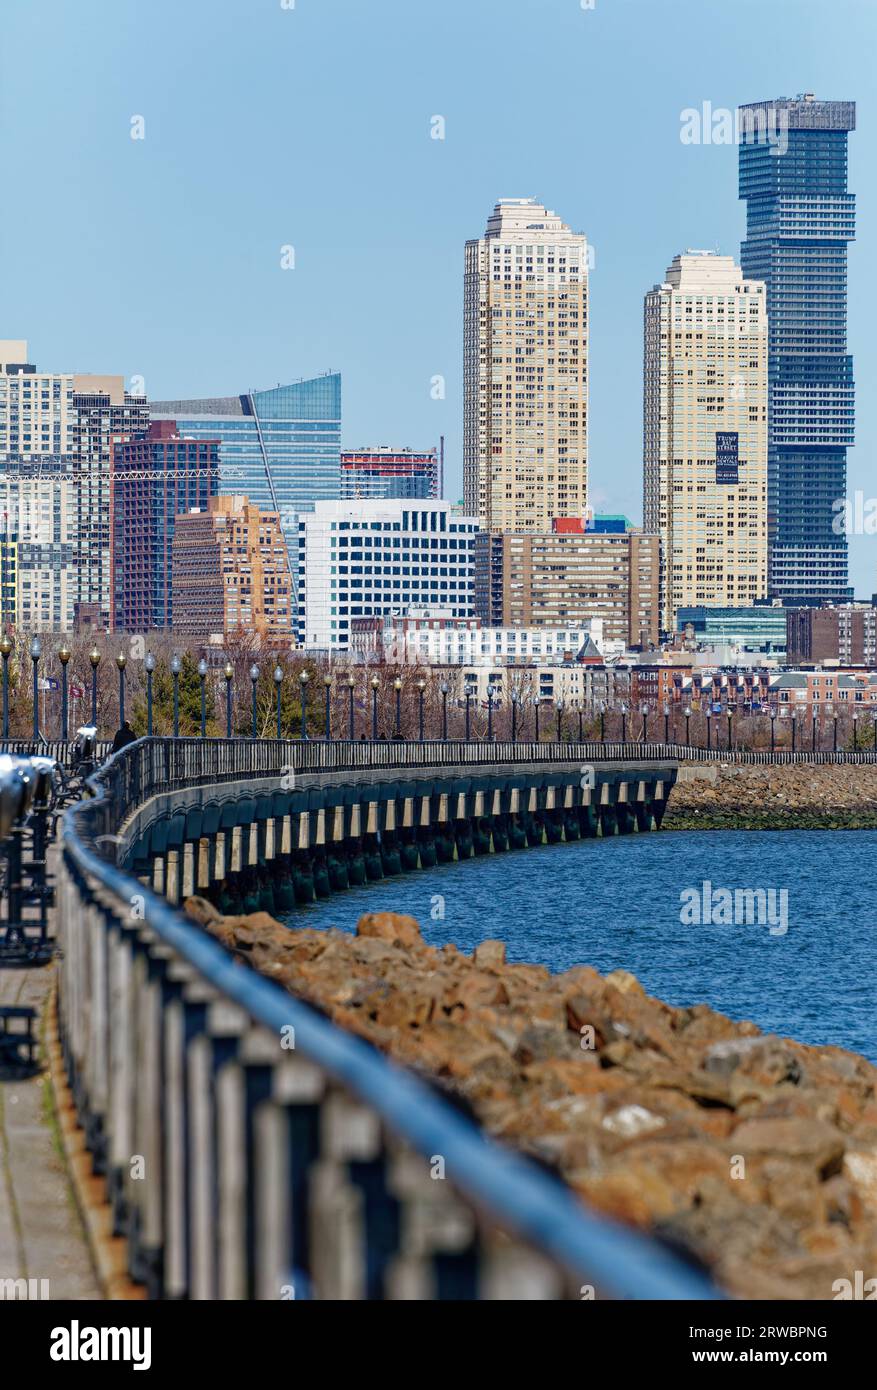 The Liberty State Park walkway, spanning the Hudson Riverfront from Black Tom Island to the CRRNJ Terminal, offers a view of the Jersey City skyline. Stock Photo